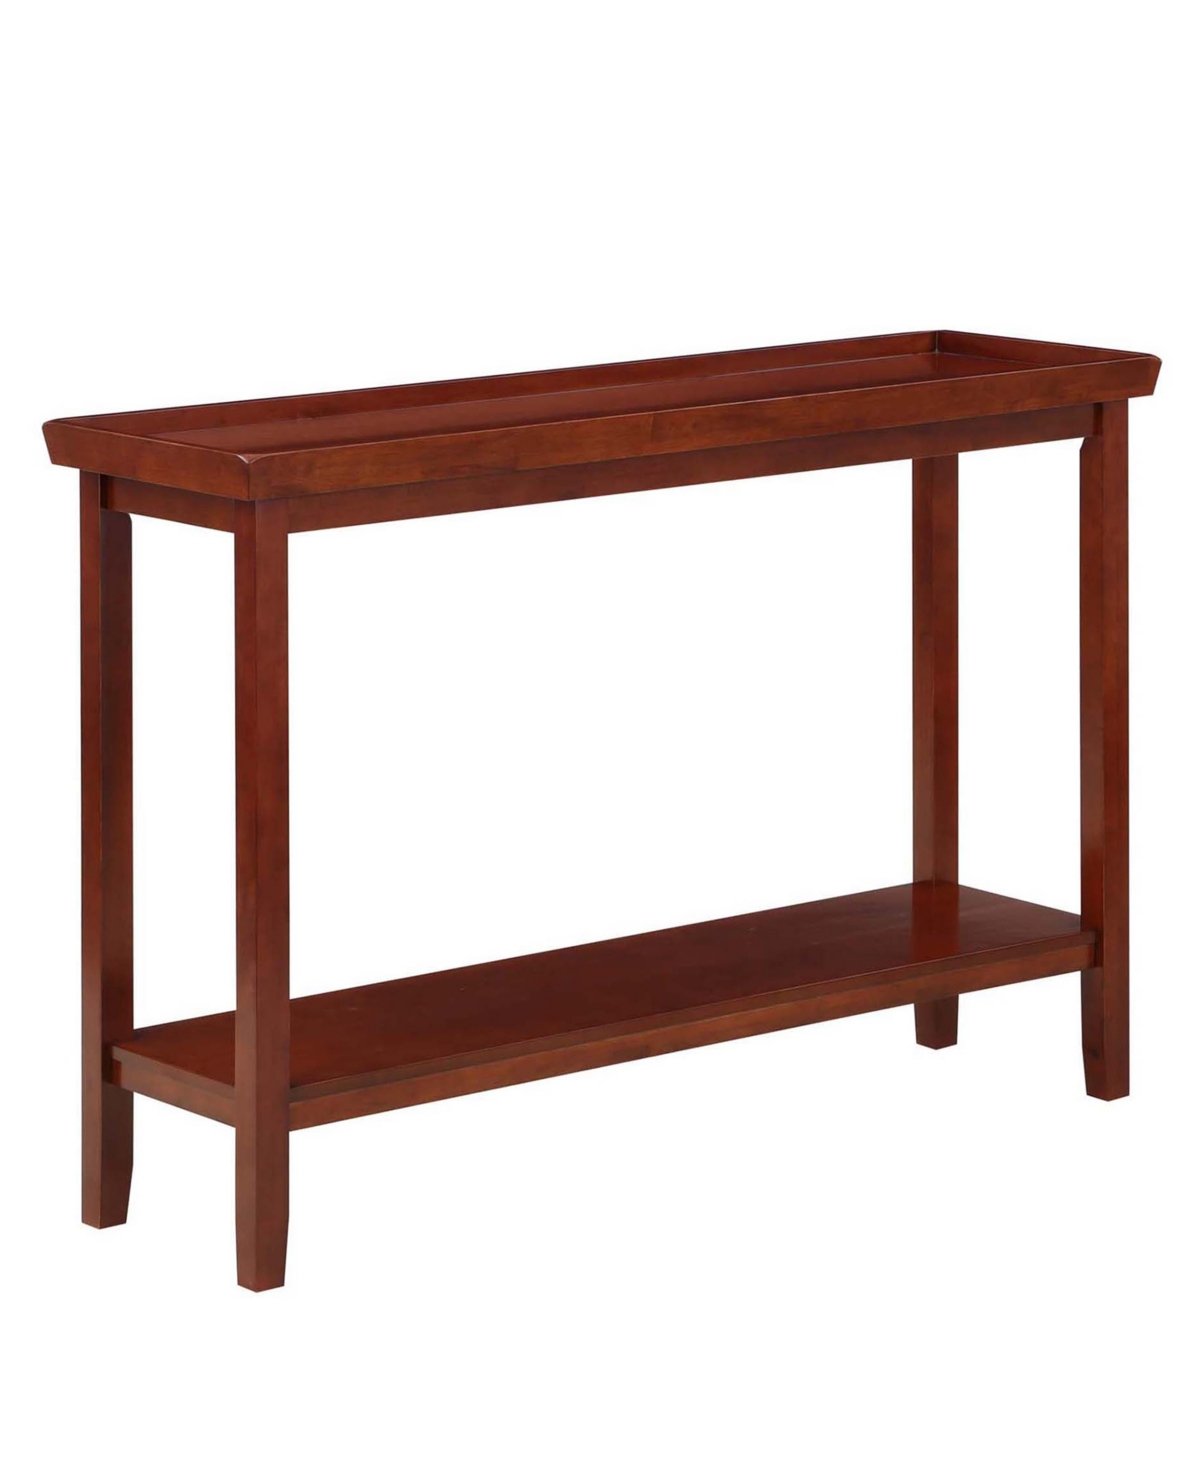 CONVENIENCE CONCEPTS 48" WOOD LEDGEWOOD CONSOLE TABLE WITH SHELF